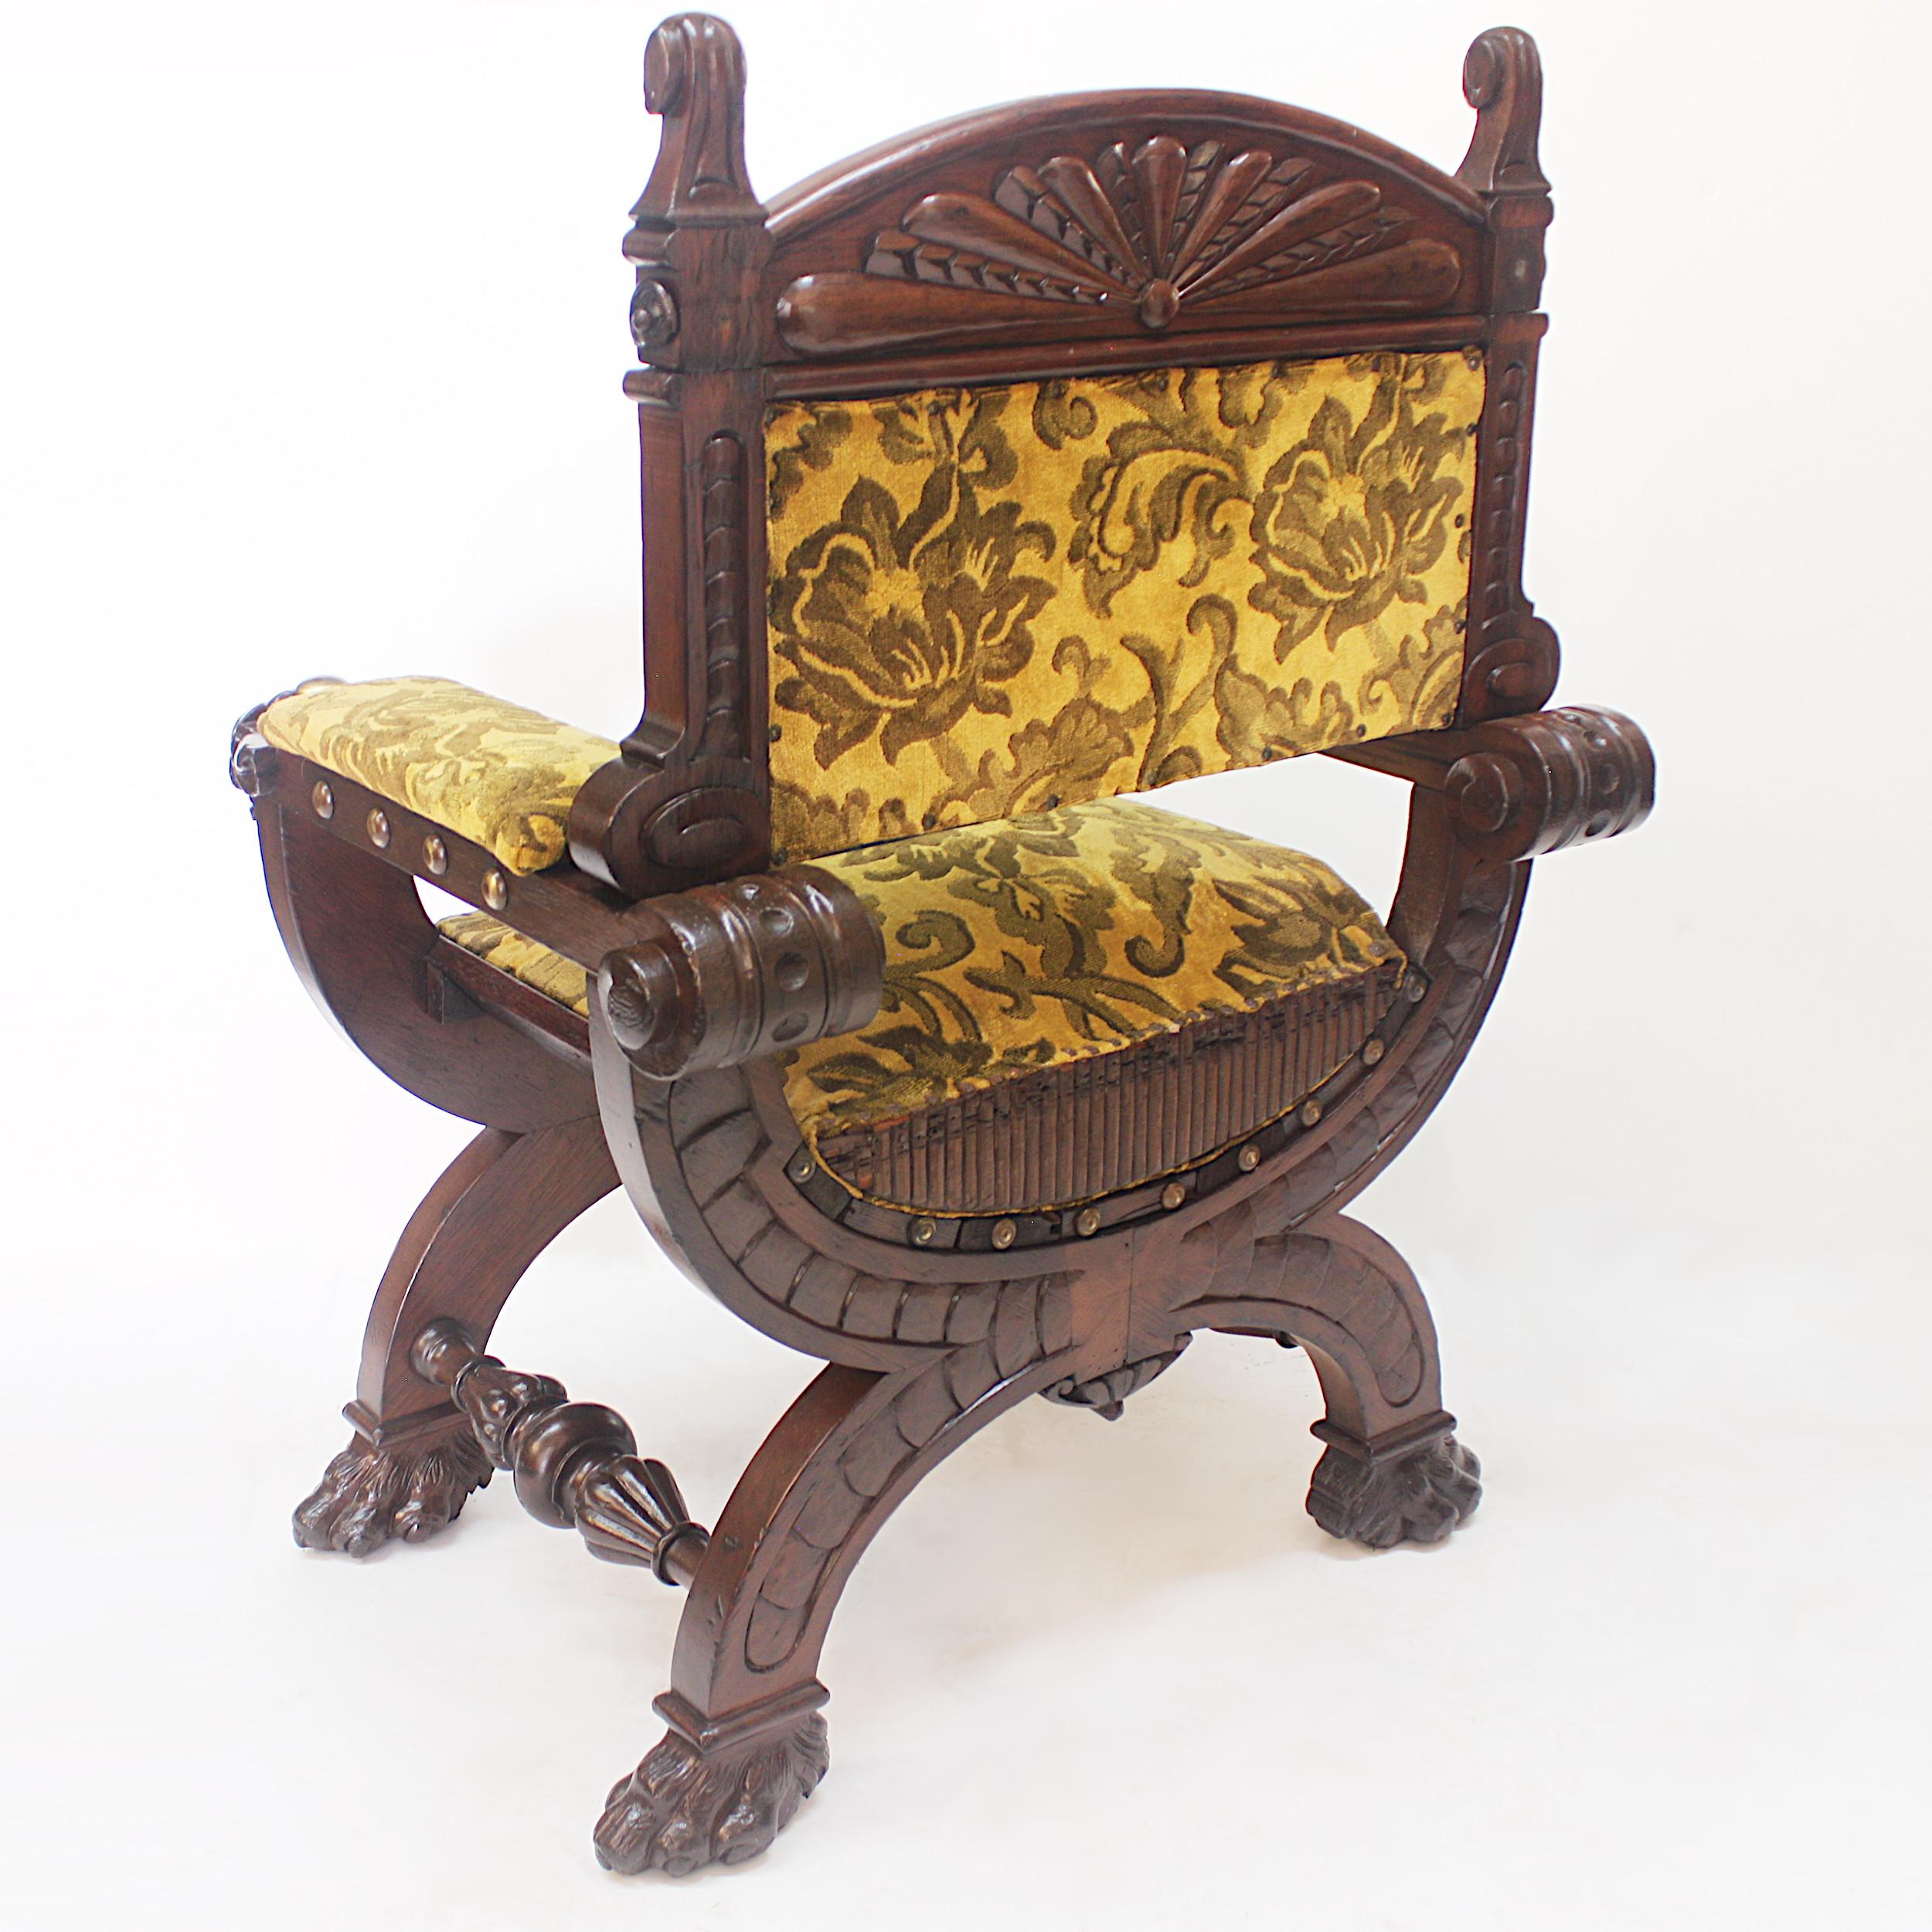 Neoclassical Unusual Early 20th Century Photographer's Posing Chair with Ornate Carving For Sale